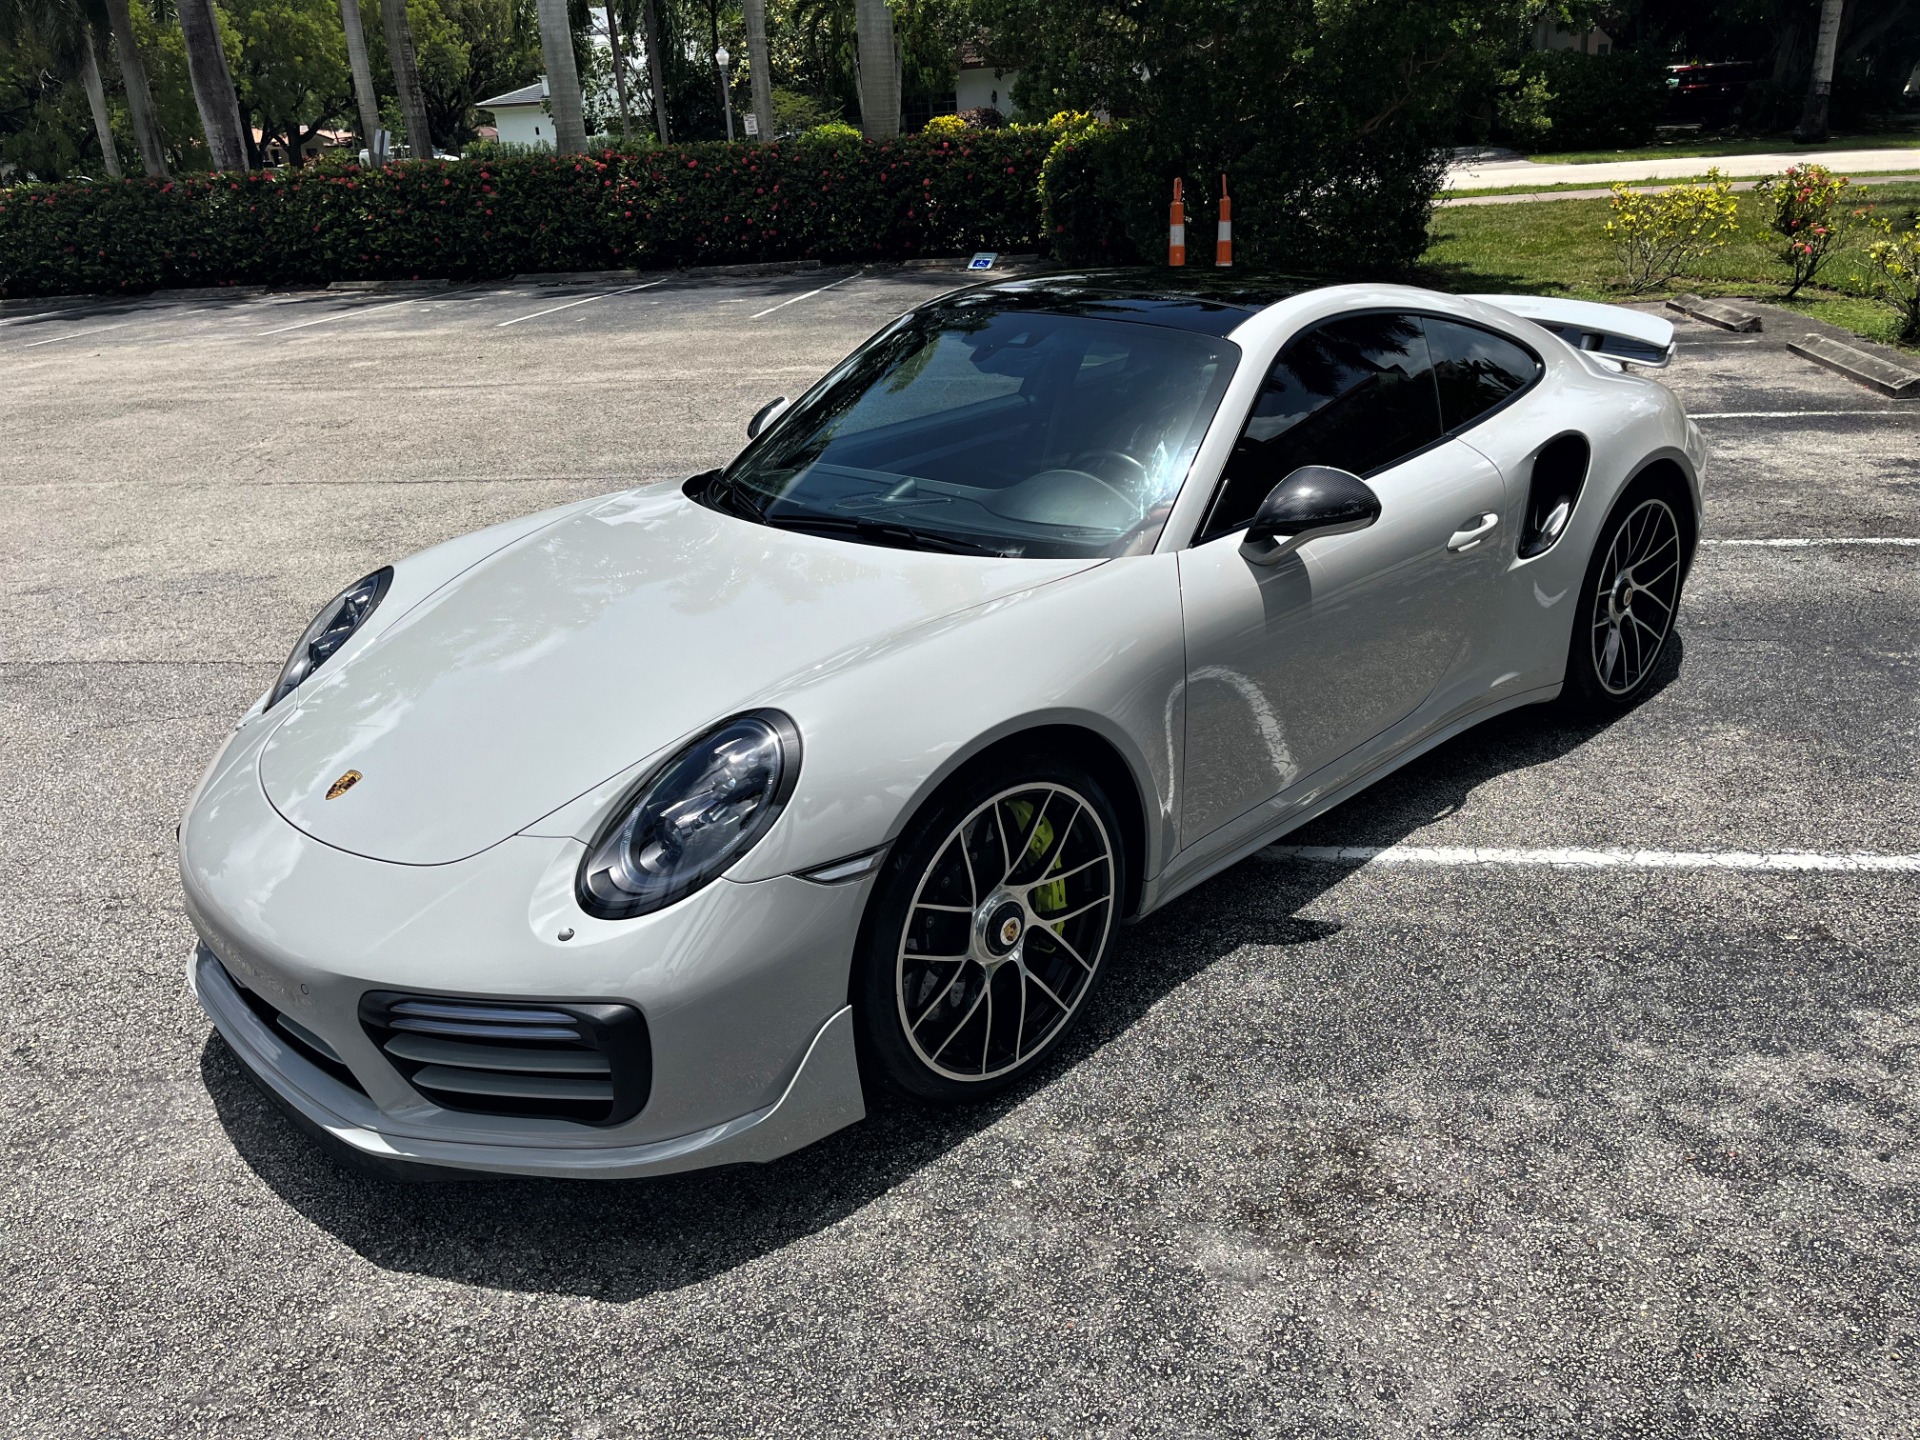 Used 2018 Porsche 911 Turbo S for sale $166,850 at The Gables Sports Cars in Miami FL 33146 2